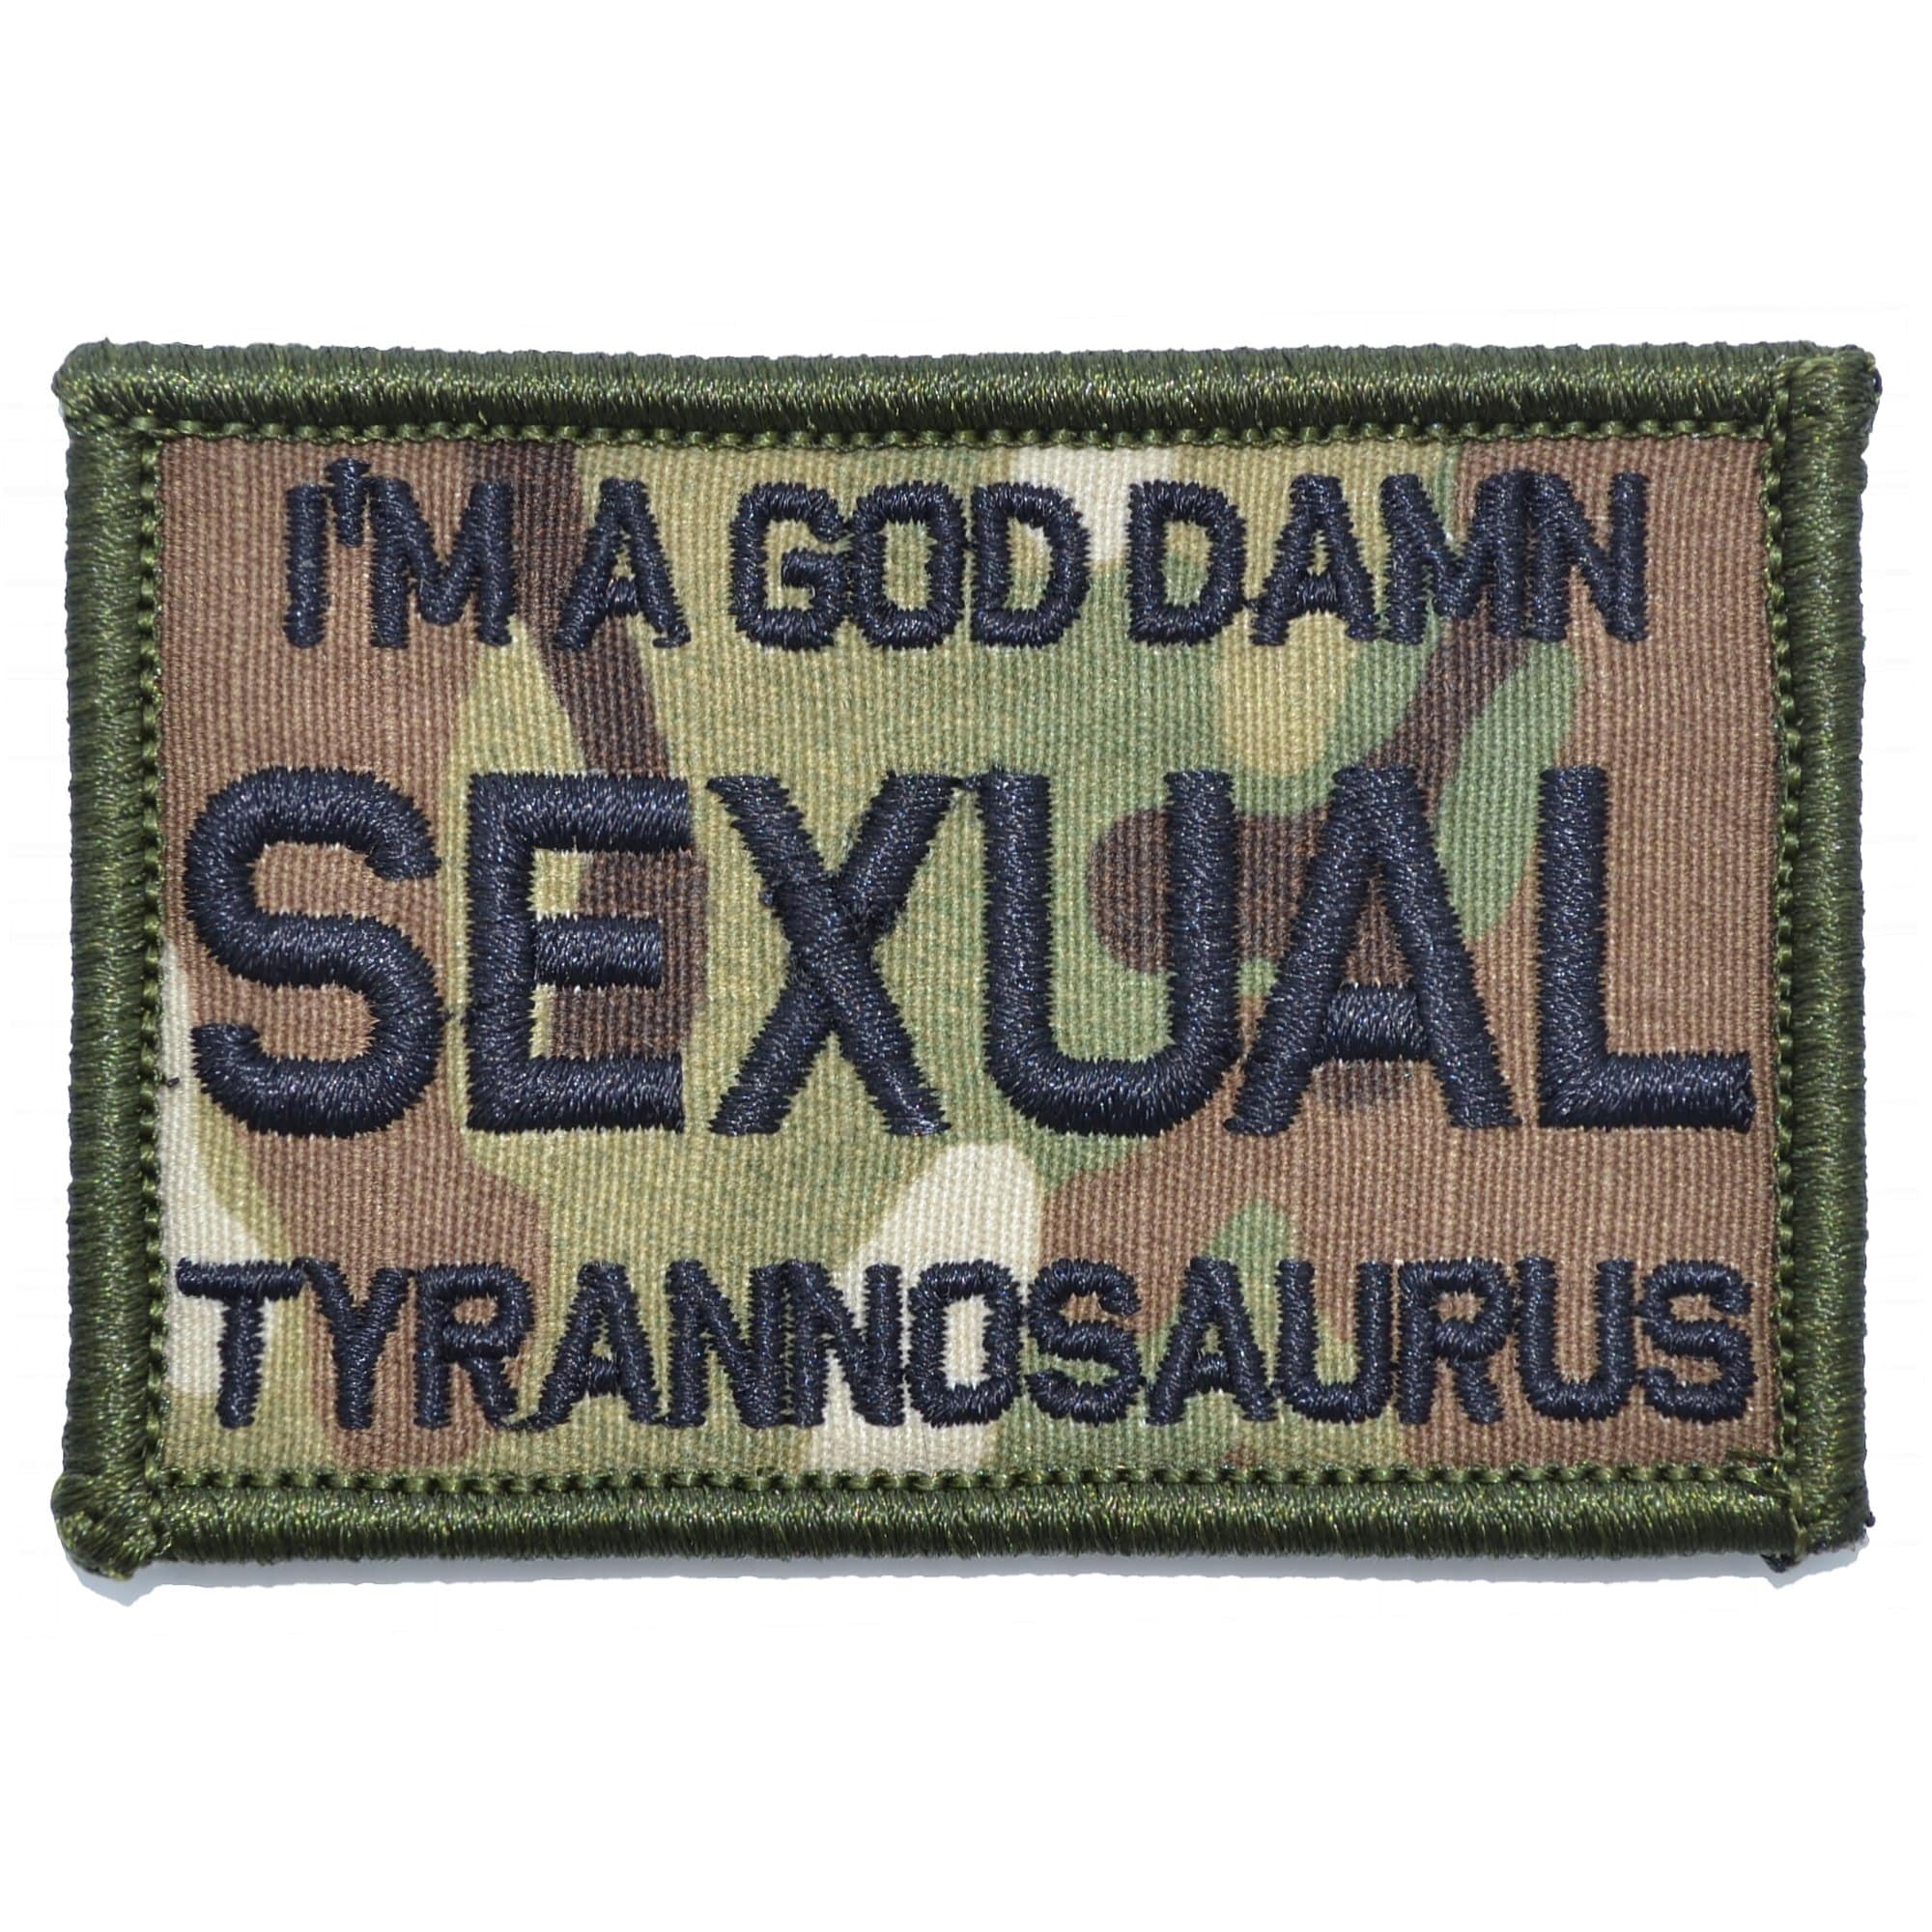 Tactical Gear Junkie Patches MultiCam I'm a God Damn Sexual Tyrannosaurus - 2x3 Patch